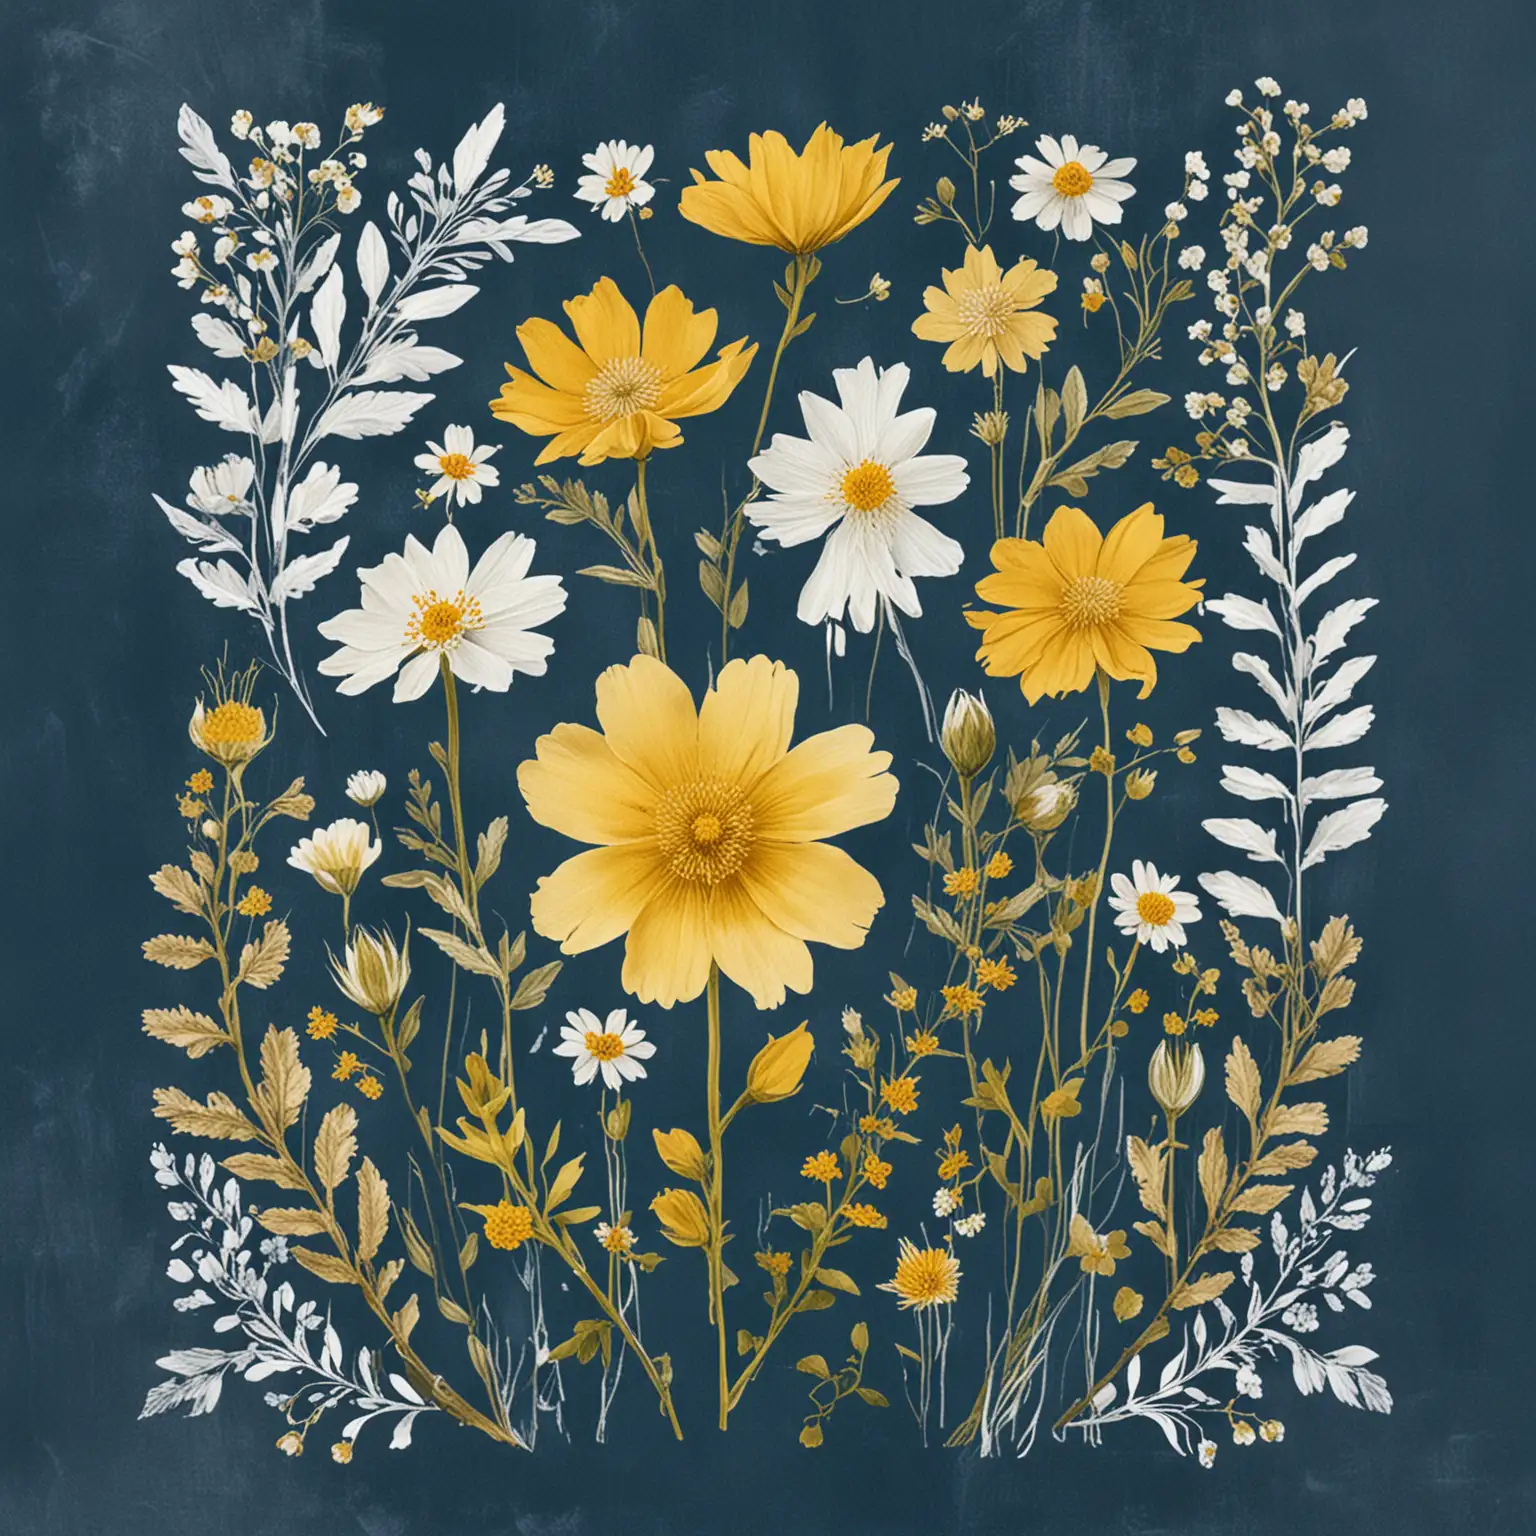 Boho Yellow and White Pressed Flower Print on Blue Background